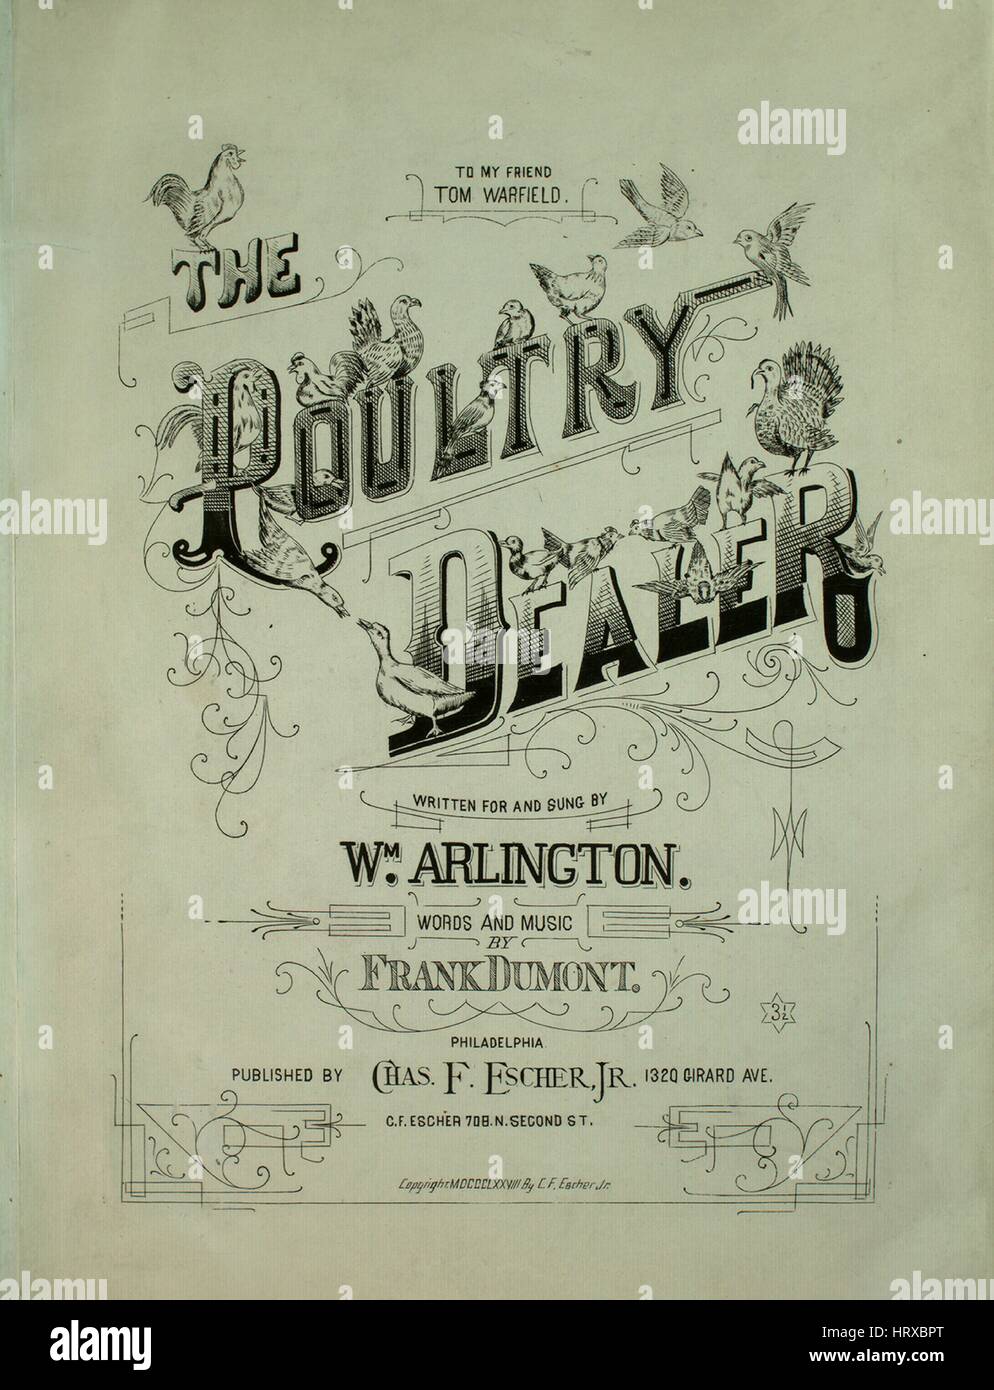 Sheet music cover image of the song 'The Poultry Dealer', with original authorship notes reading 'Words and Music by Frank Dumont', United States, 1878. The publisher is listed as 'Chas. F. Escher, Jr., 1320 Girard Ave.', the form of composition is 'strophic with chorus', the instrumentation is 'piano and voice', the first line reads 'My name is Simon Cloverseed, I deal in Poultry eggs', and the illustration artist is listed as 'None'. Stock Photo